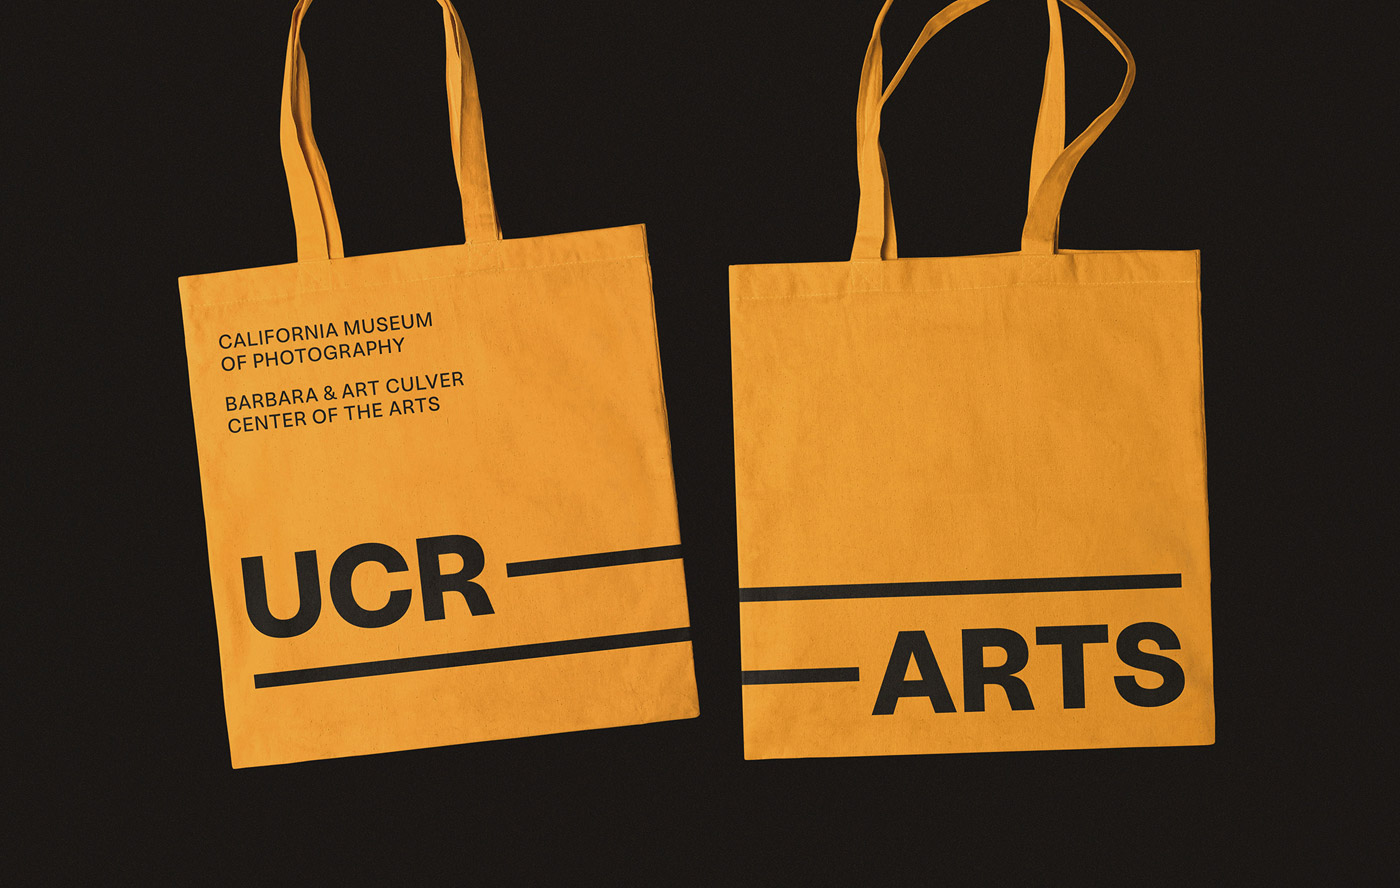 Rebranding by Forth + Back of the visual identity for the art museum and cultural center, UCR ARTS.